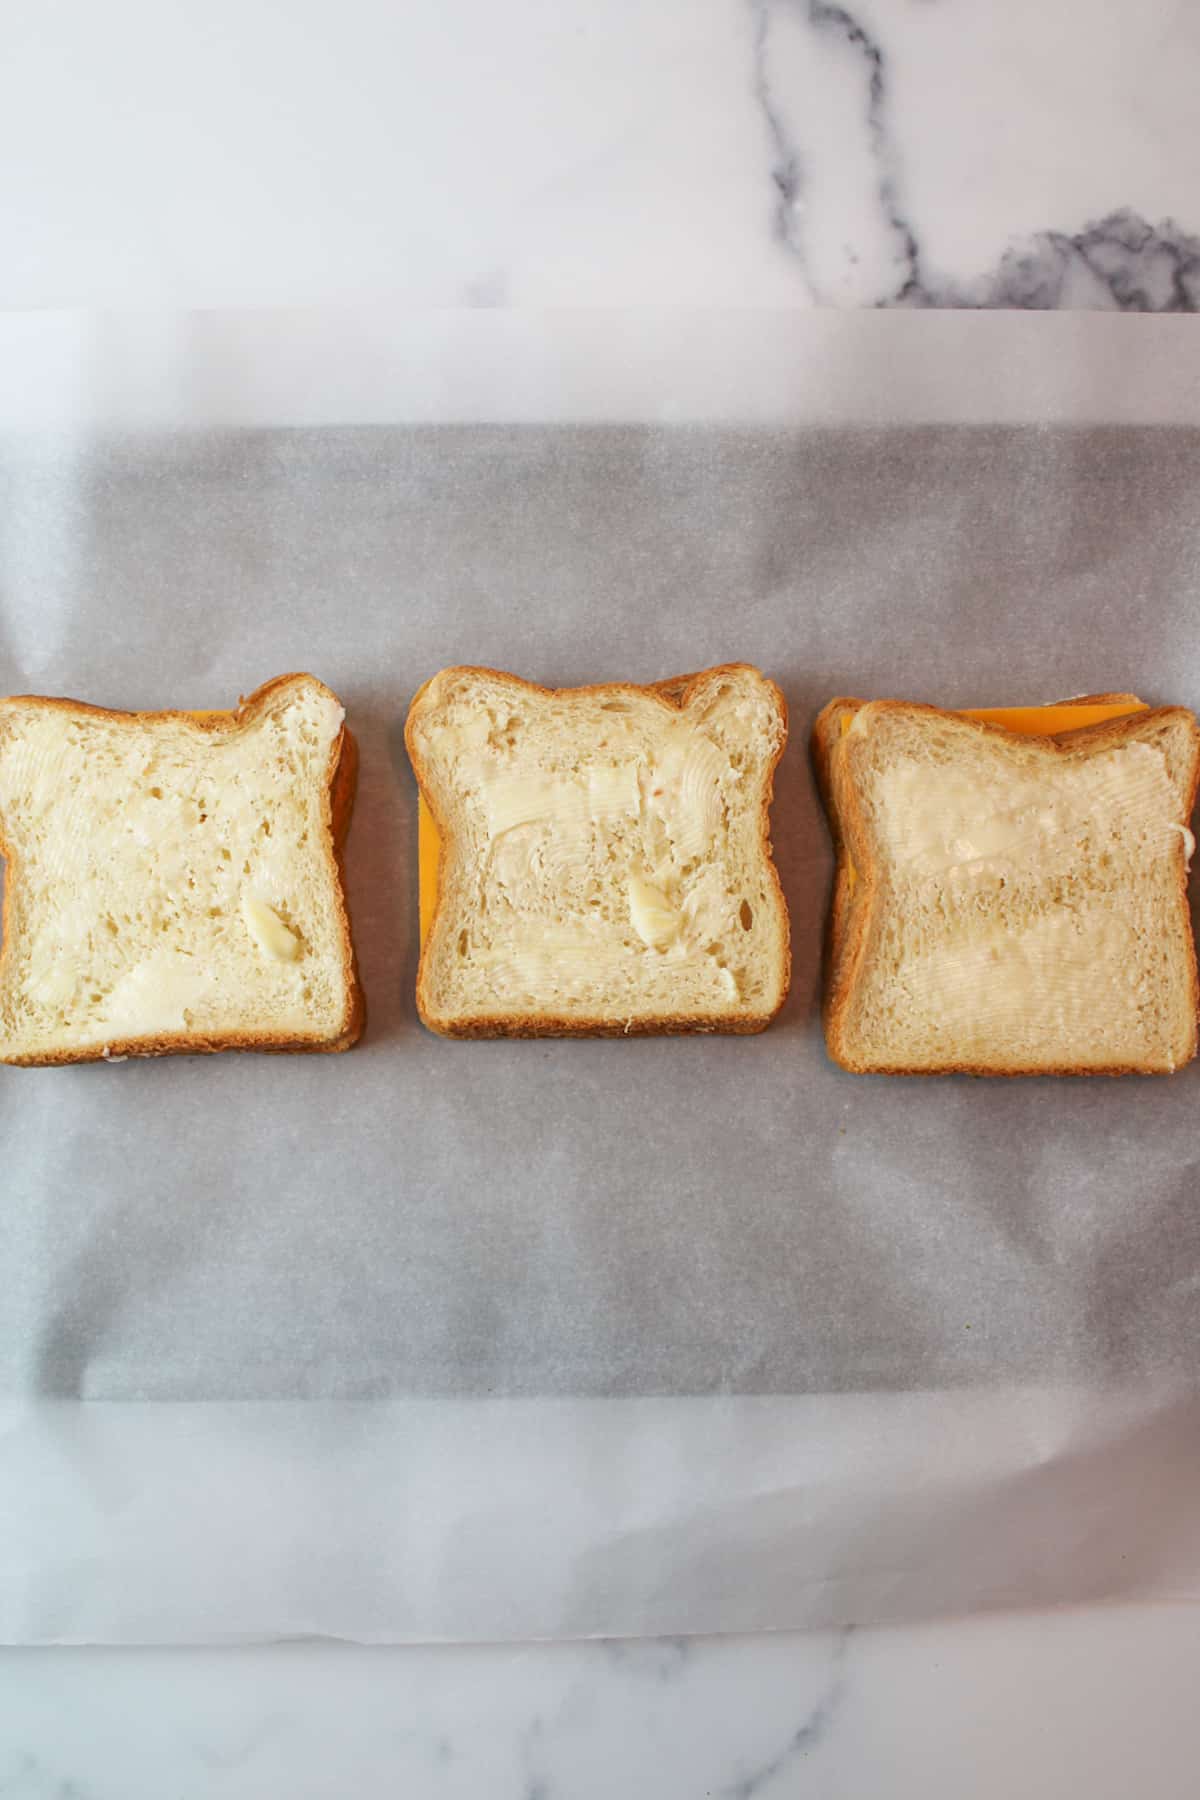 assembled uncooked buttered grilled cheese sandwiches on parchment paper lined baking sheet.